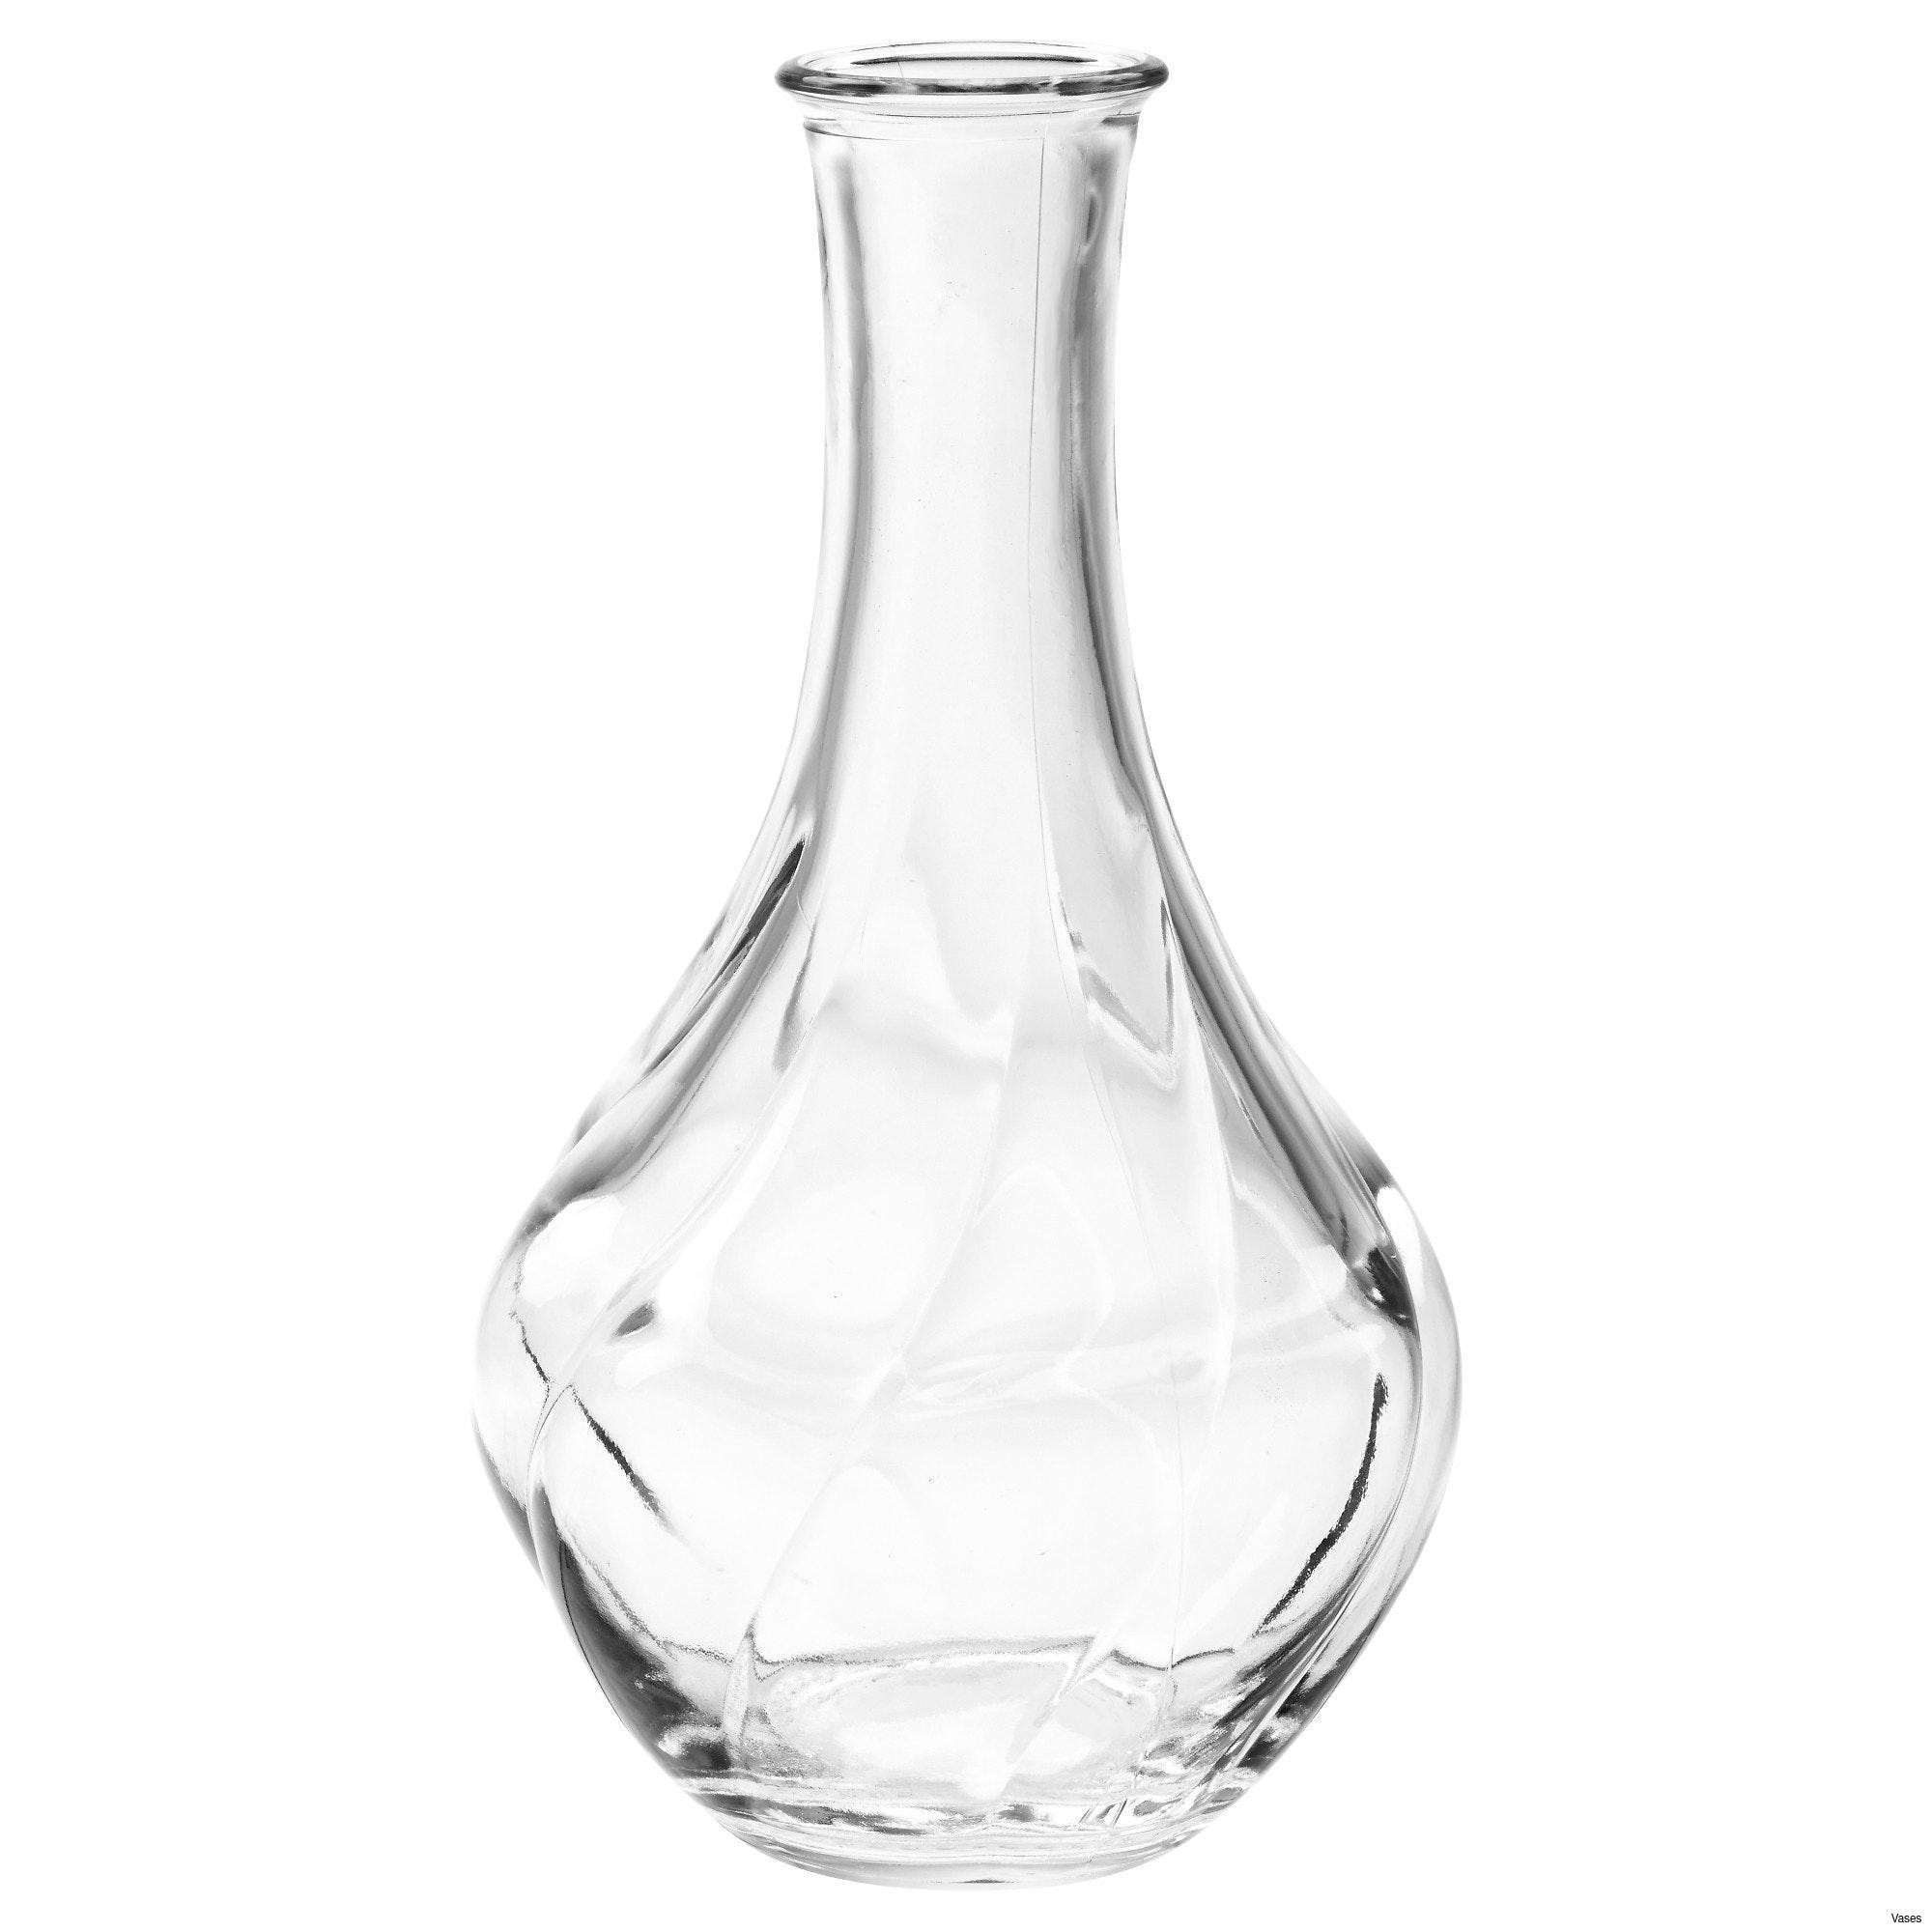 bulb forcing vases for sale of large glass vases pictures clear glass planters fresh clear glass throughout large glass vases gallery living room glass vases fresh clear vase 0d tags amazing and of